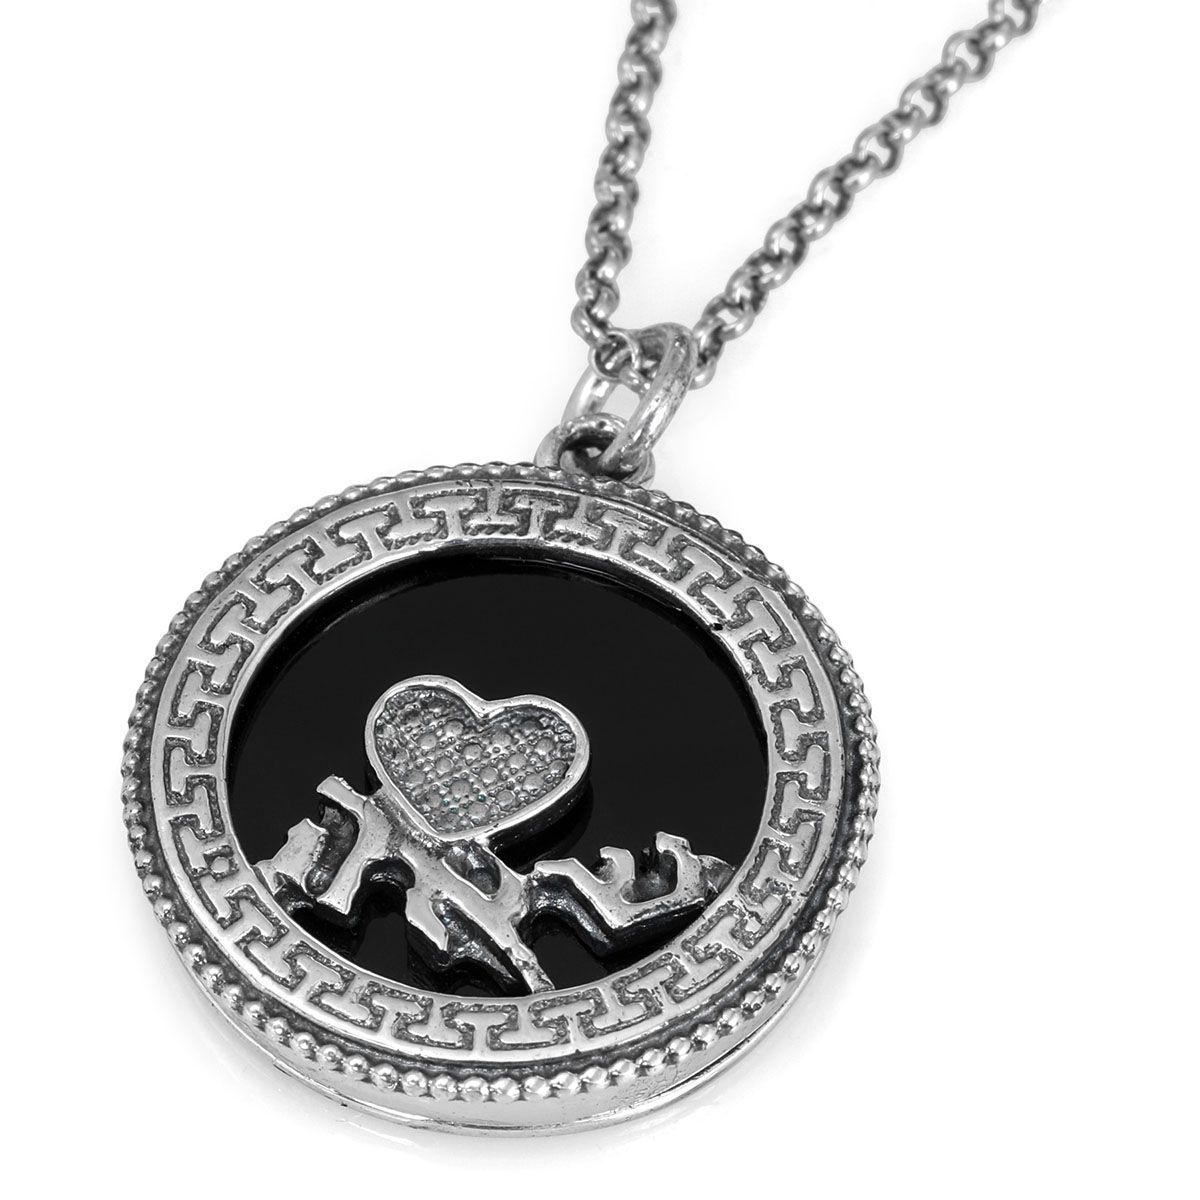 Solid 925 Sterling Silver and Onyx Stone Love and Faith Kabbalah Necklace (Thick Pendant) - 1